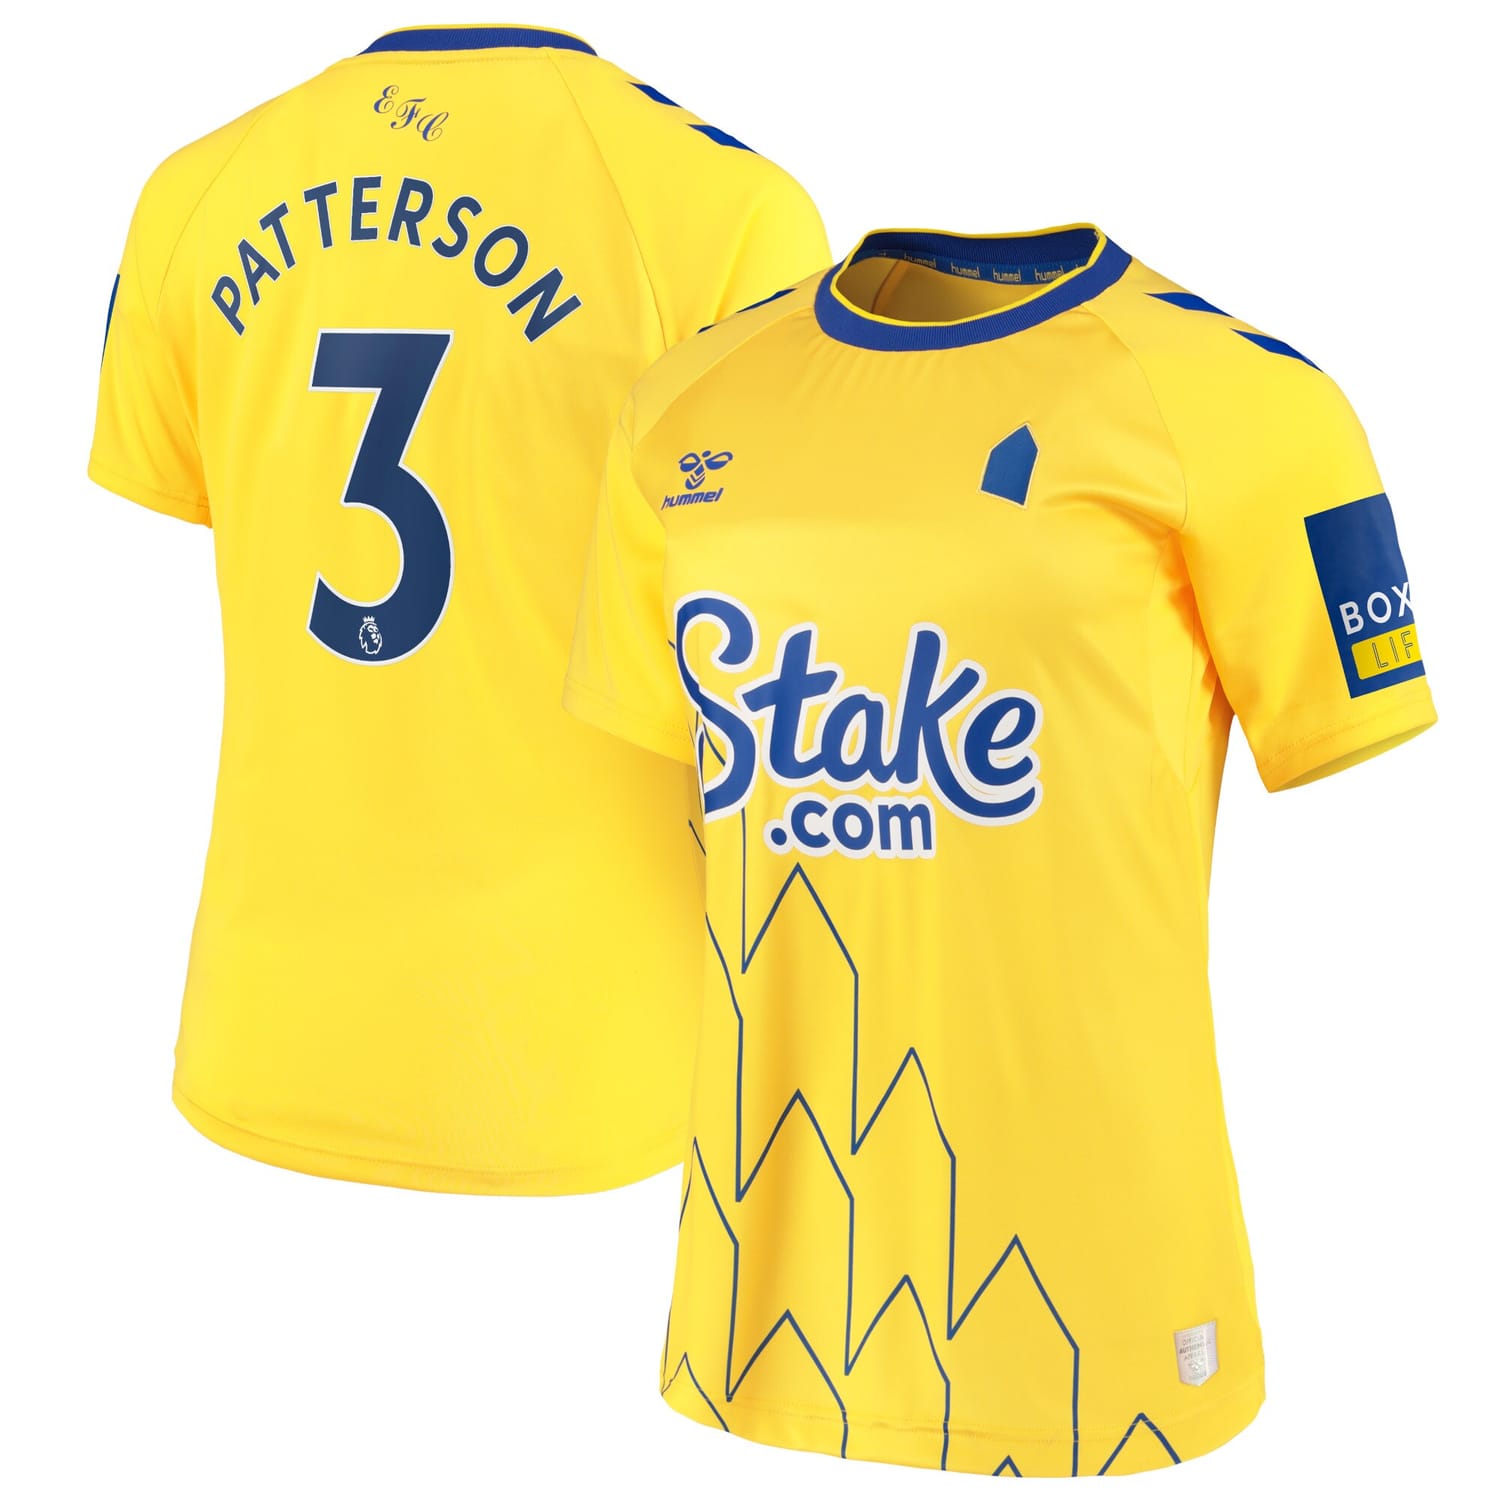 Premier League Everton Third Jersey Shirt 2022-23 player Nathan Patterson 3 printing for Women